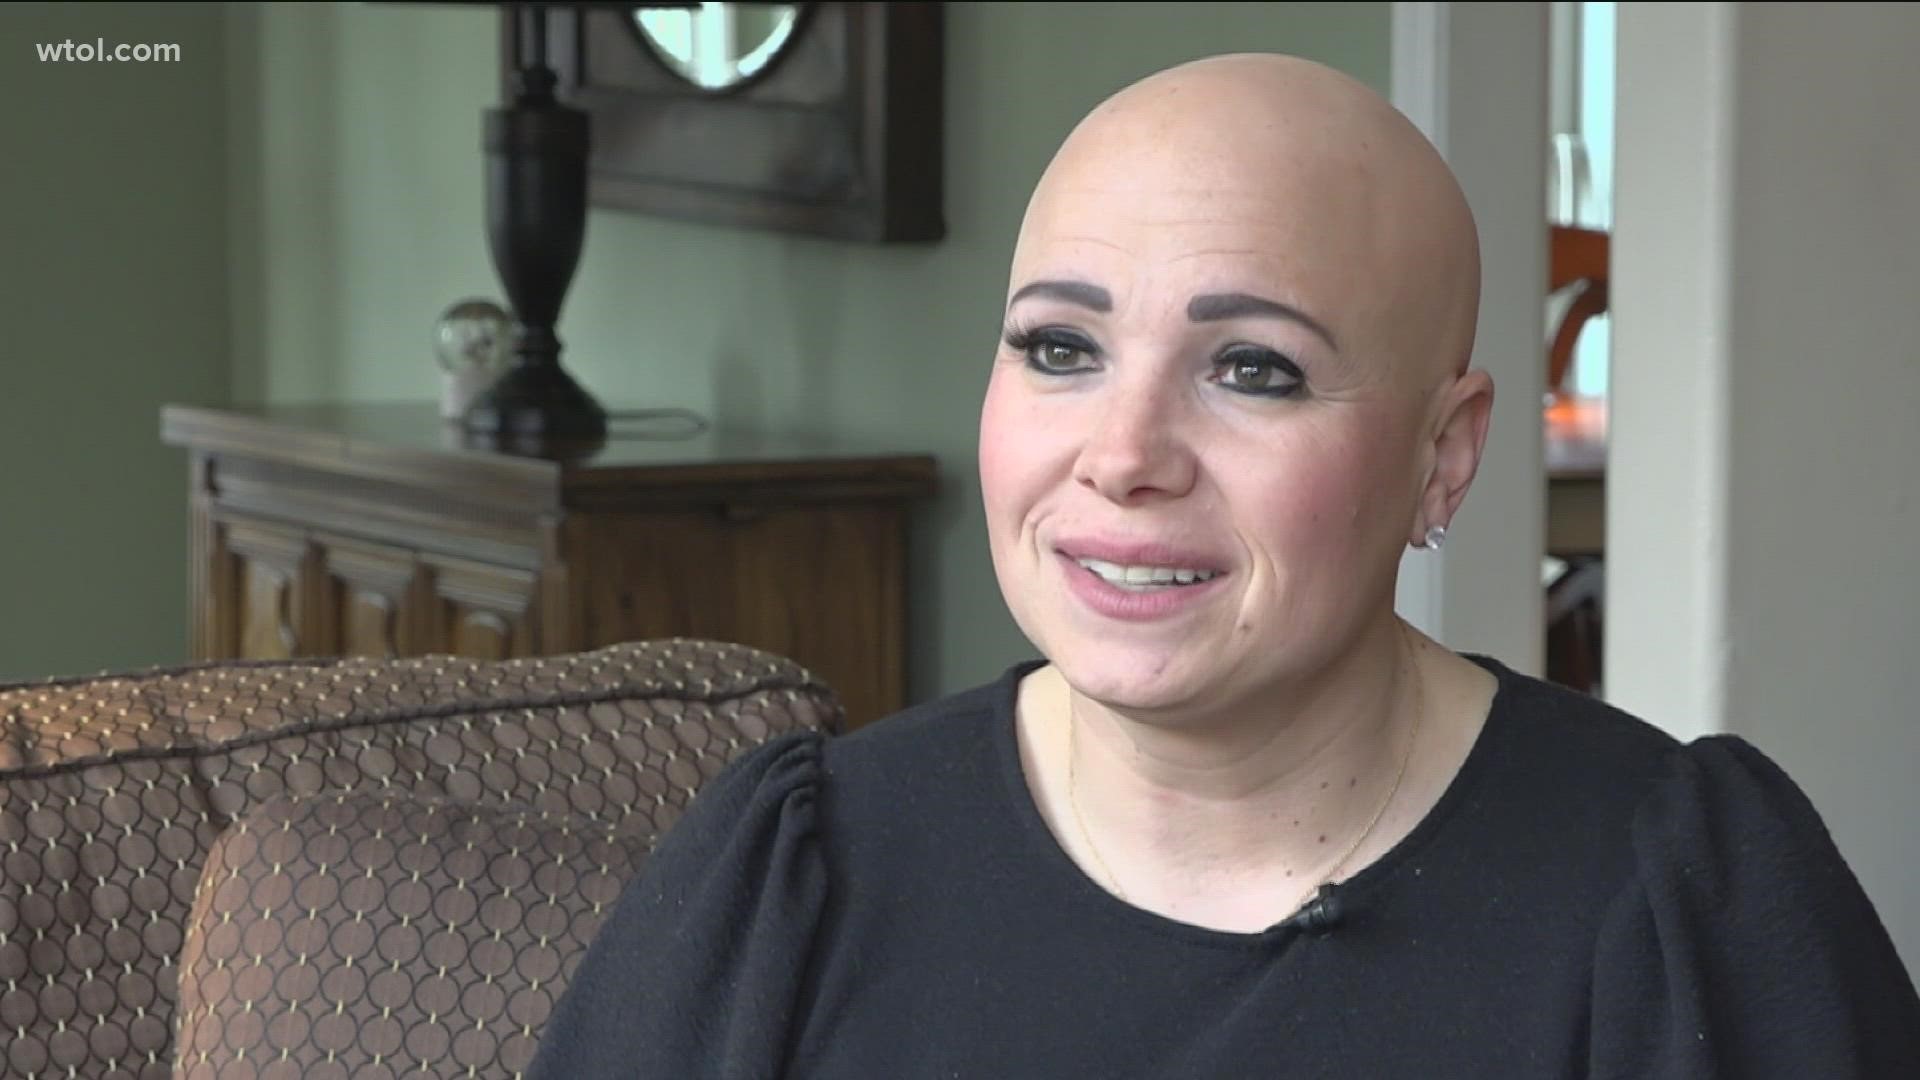 "This has opened up an opportunity for other people with alopecia to bring awareness and educate not only our community but the world."